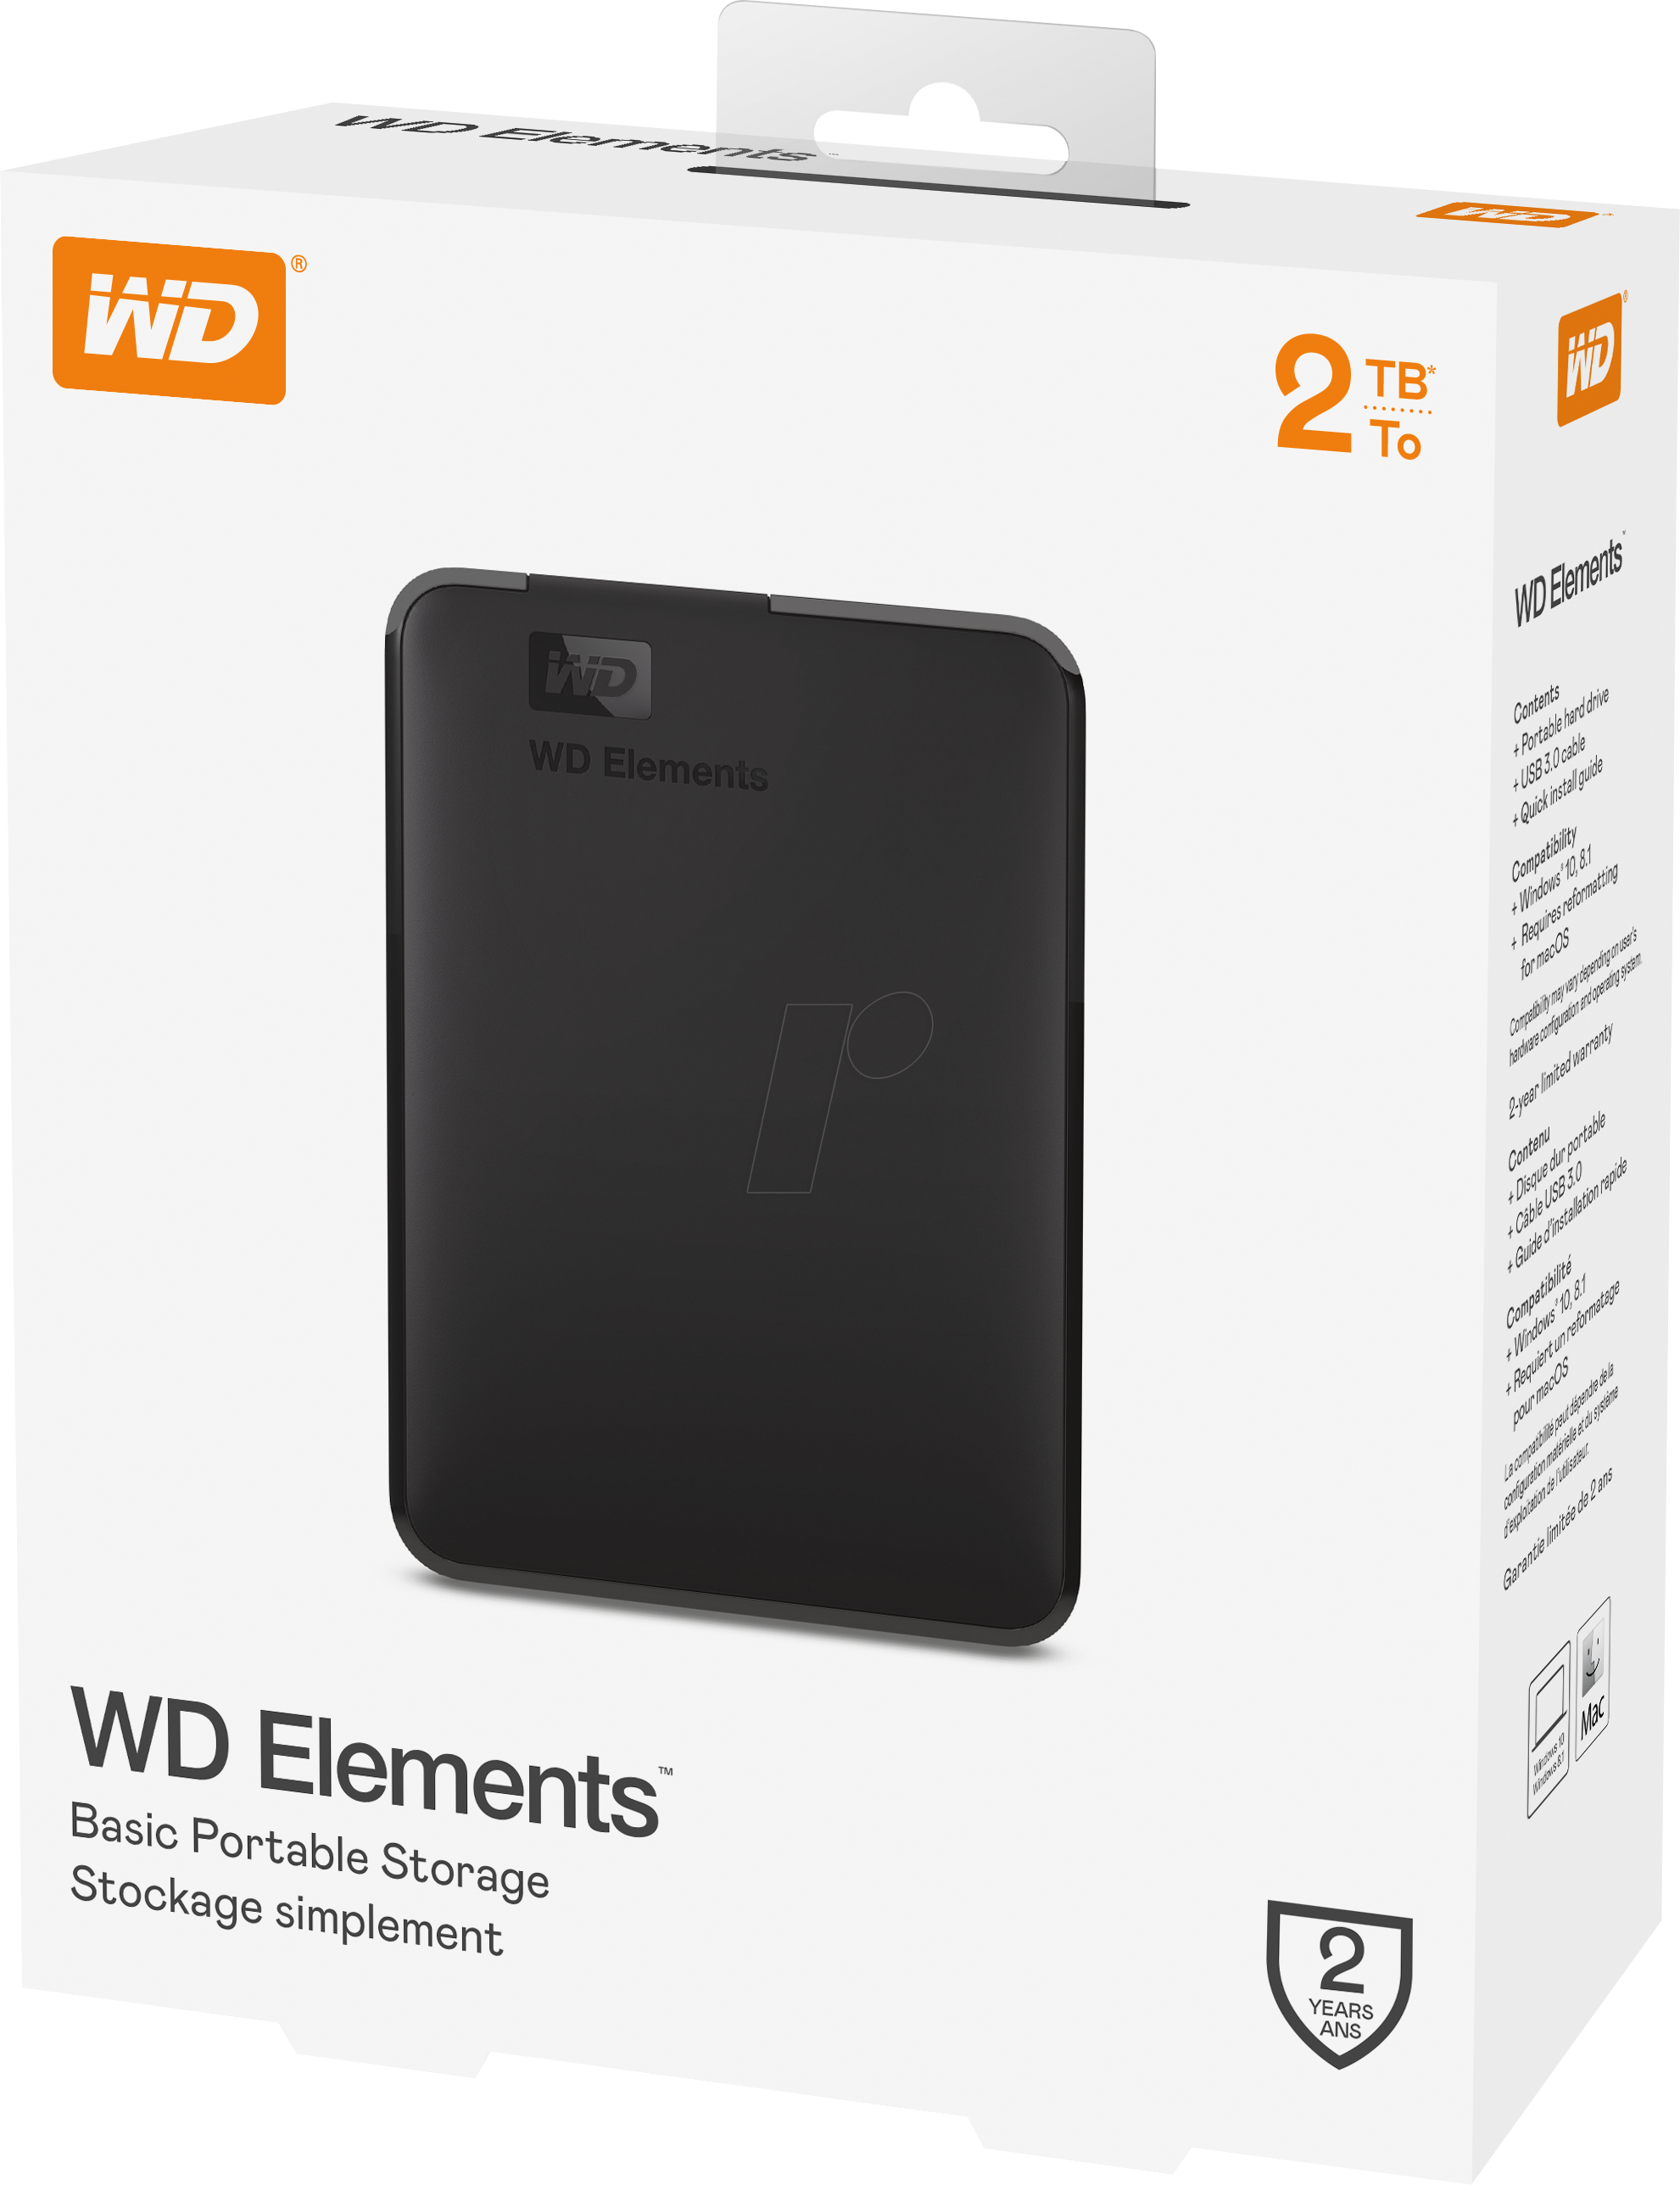 format wd elements for mac time machine